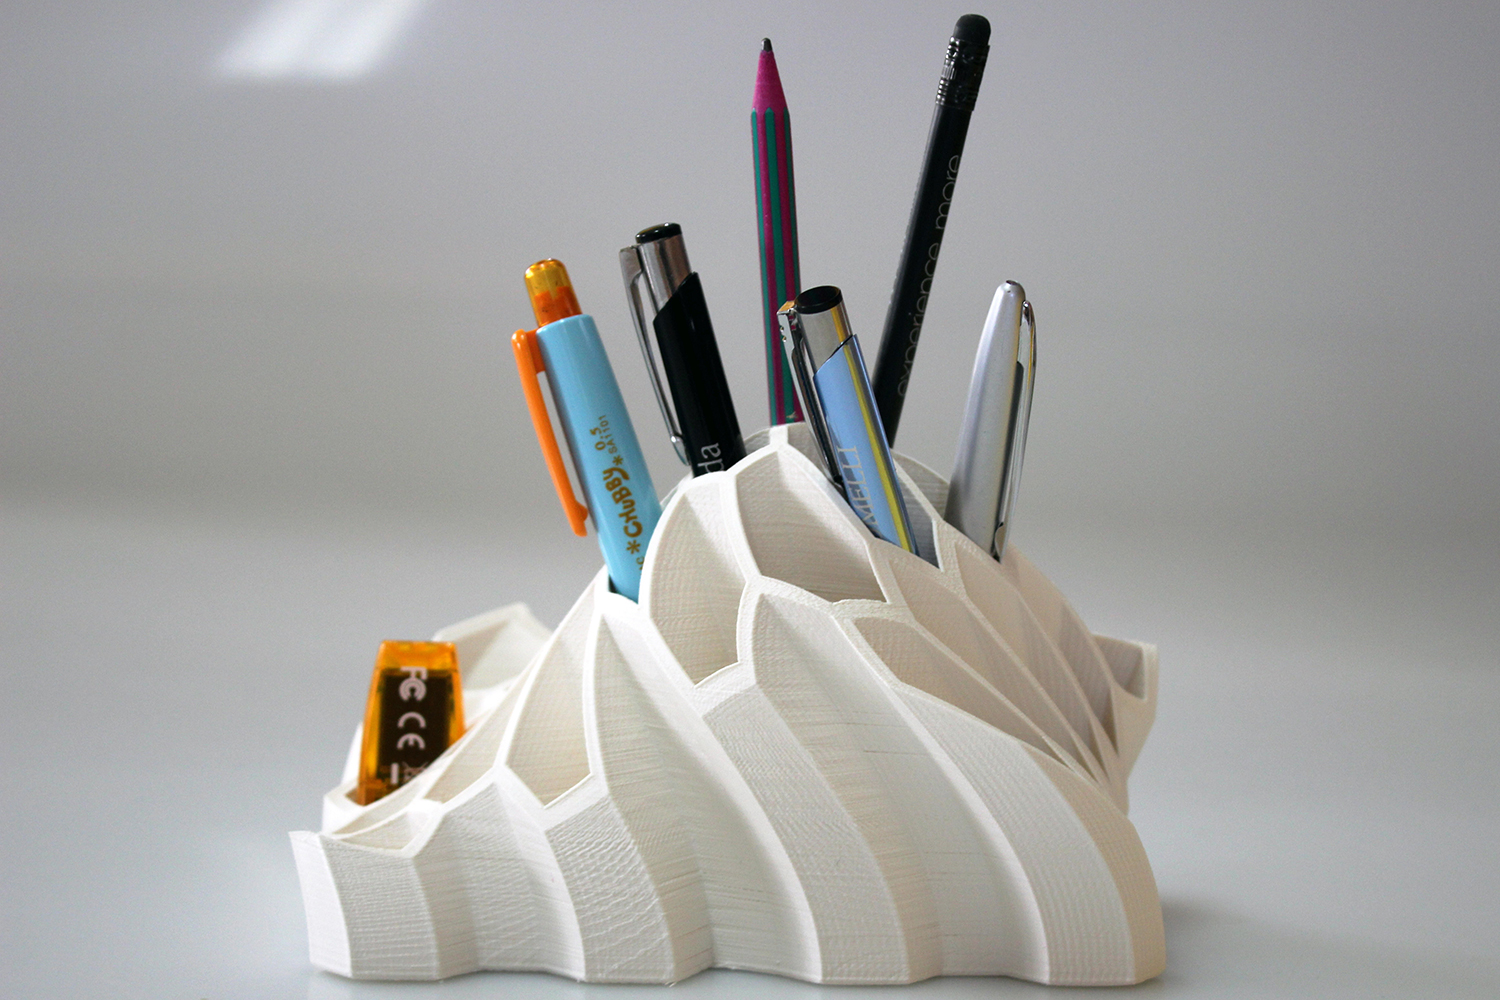 What Can 3D Printing Be Used For? Here Are 10 Amazing Examples